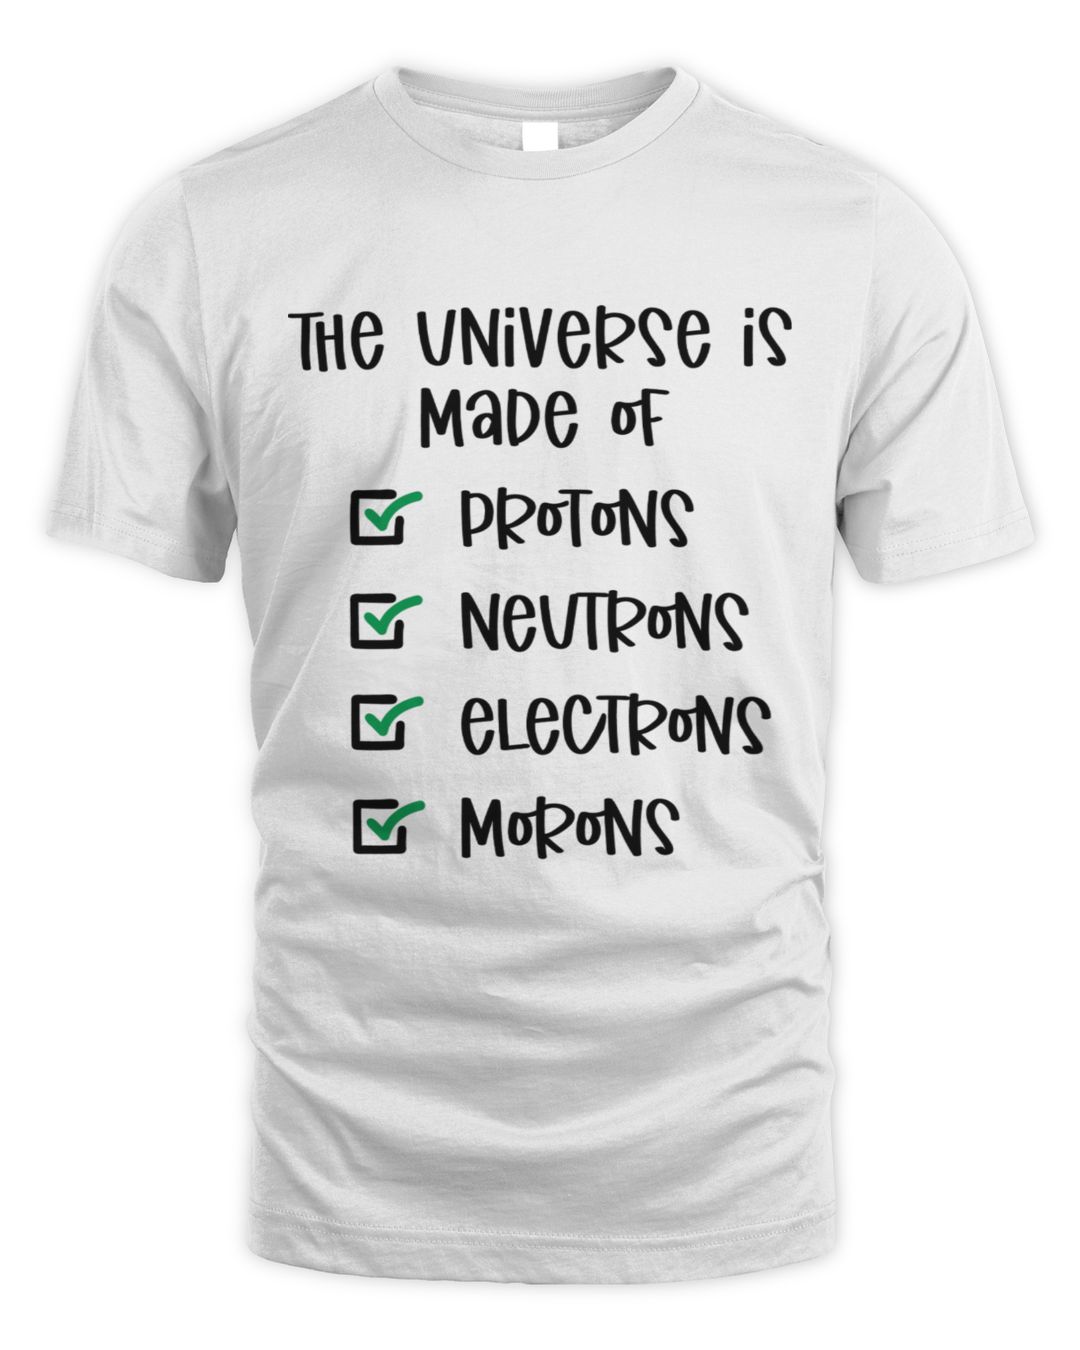 Protons Neutrons Electrons Morons | Science Store